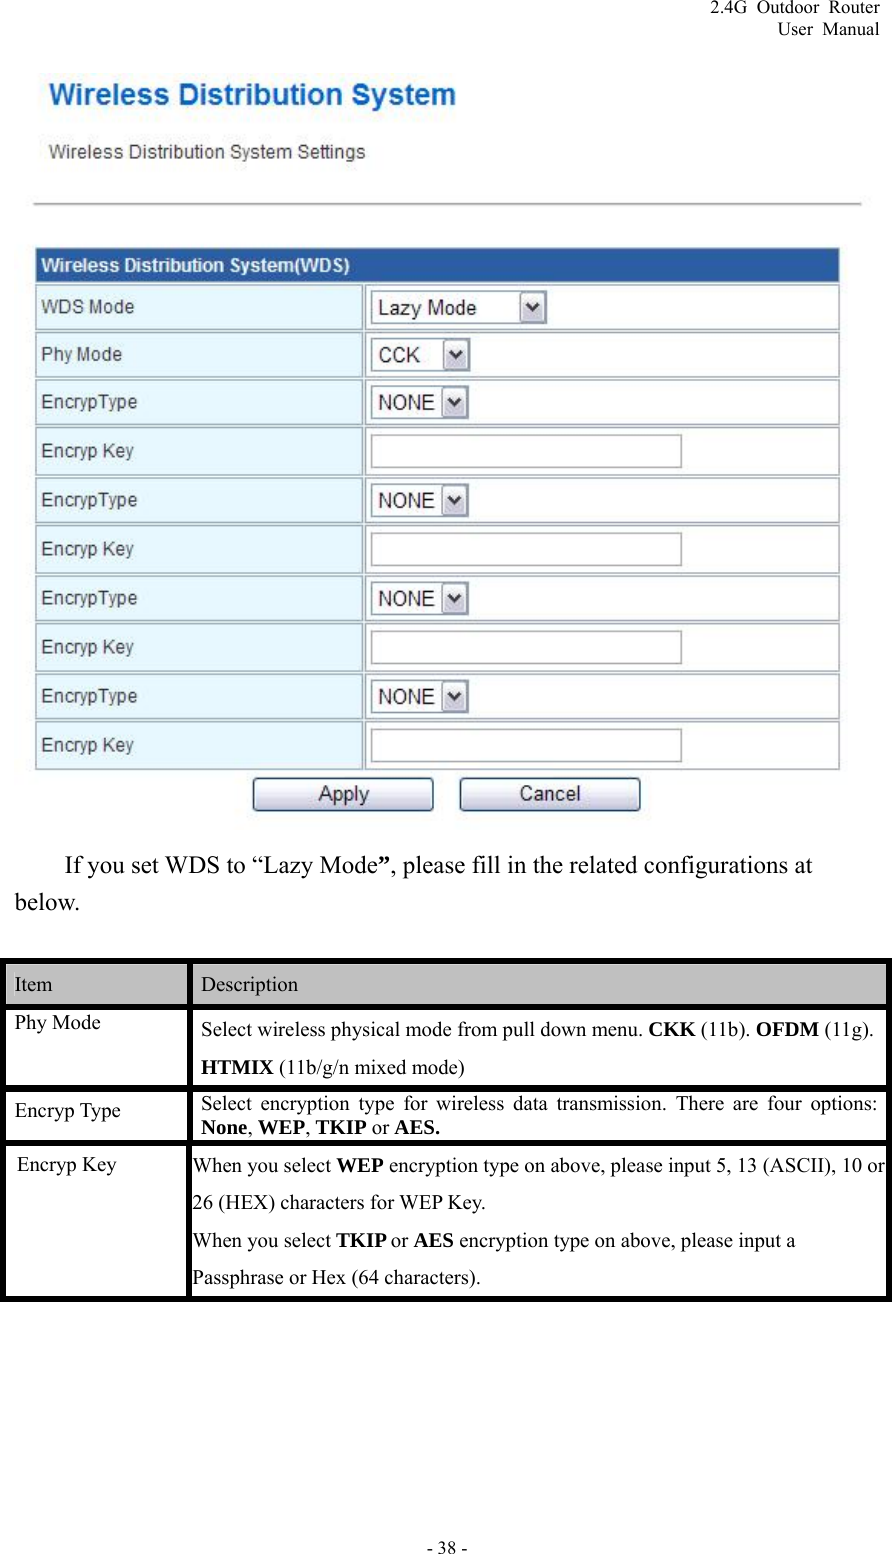 2.4G Outdoor Router User Manual  If you set WDS to “Lazy Mode”, please fill in the related configurations at below.  Item   Description  Phy Mode  Select wireless physical mode from pull down menu. CKK (11b). OFDM (11g). HTMIX (11b/g/n mixed mode)   Encryp Type  Select encryption type for wireless data transmission. There are four options: None, WEP, TKIP or AES. Encryp Key When you select WEP encryption type on above, please input 5, 13 (ASCII), 10 or 26 (HEX) characters for WEP Key. When you select TKIP or AES encryption type on above, please input a Passphrase or Hex (64 characters). - 38 - 